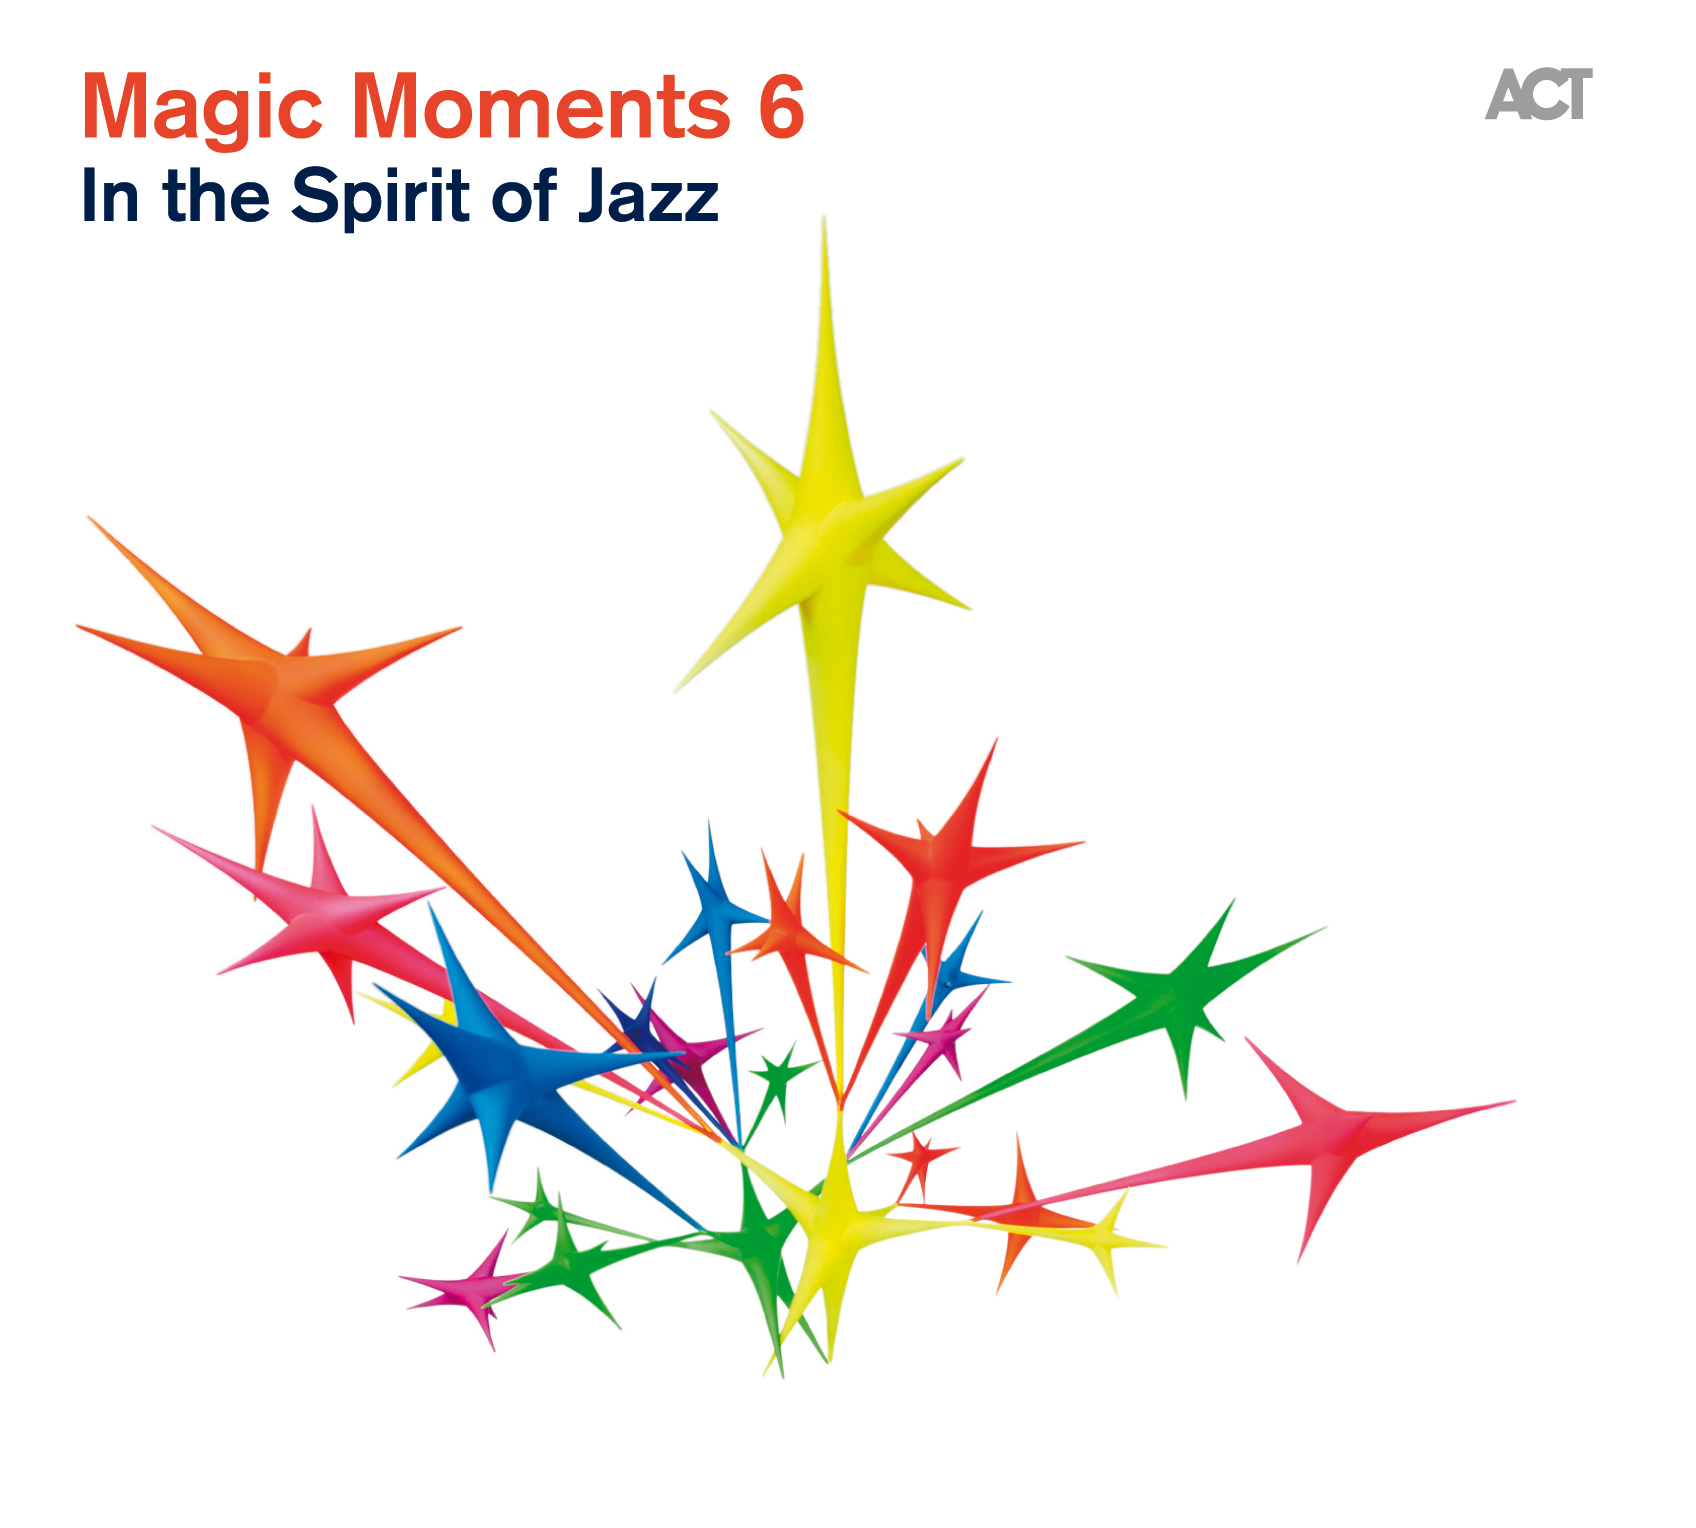 Magic Moments 6 "In The Spirit of Jazz"